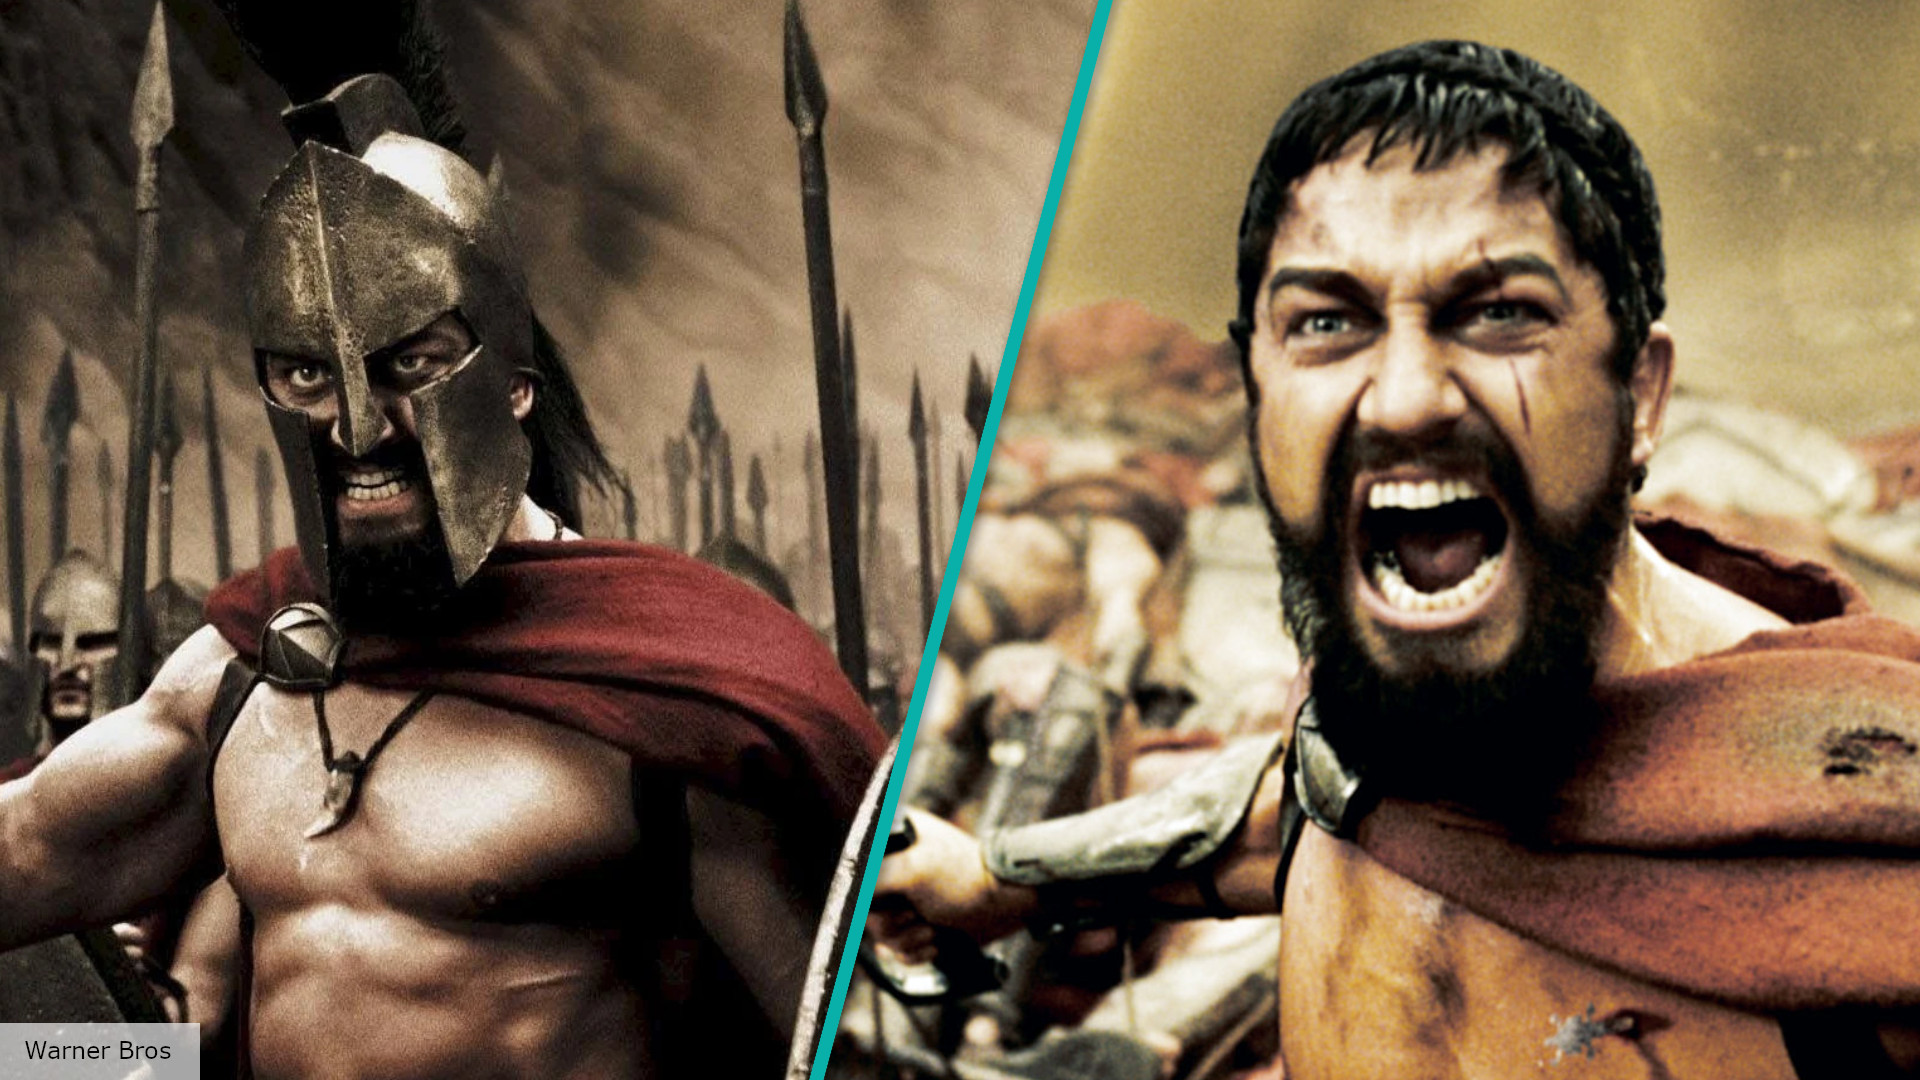 Watch '300' on Movie Central!, This is Sparta! Will King Leonidas lead his  people to glory? Watch 300 tonight at 9PM on Movie Central., By Movie  Central